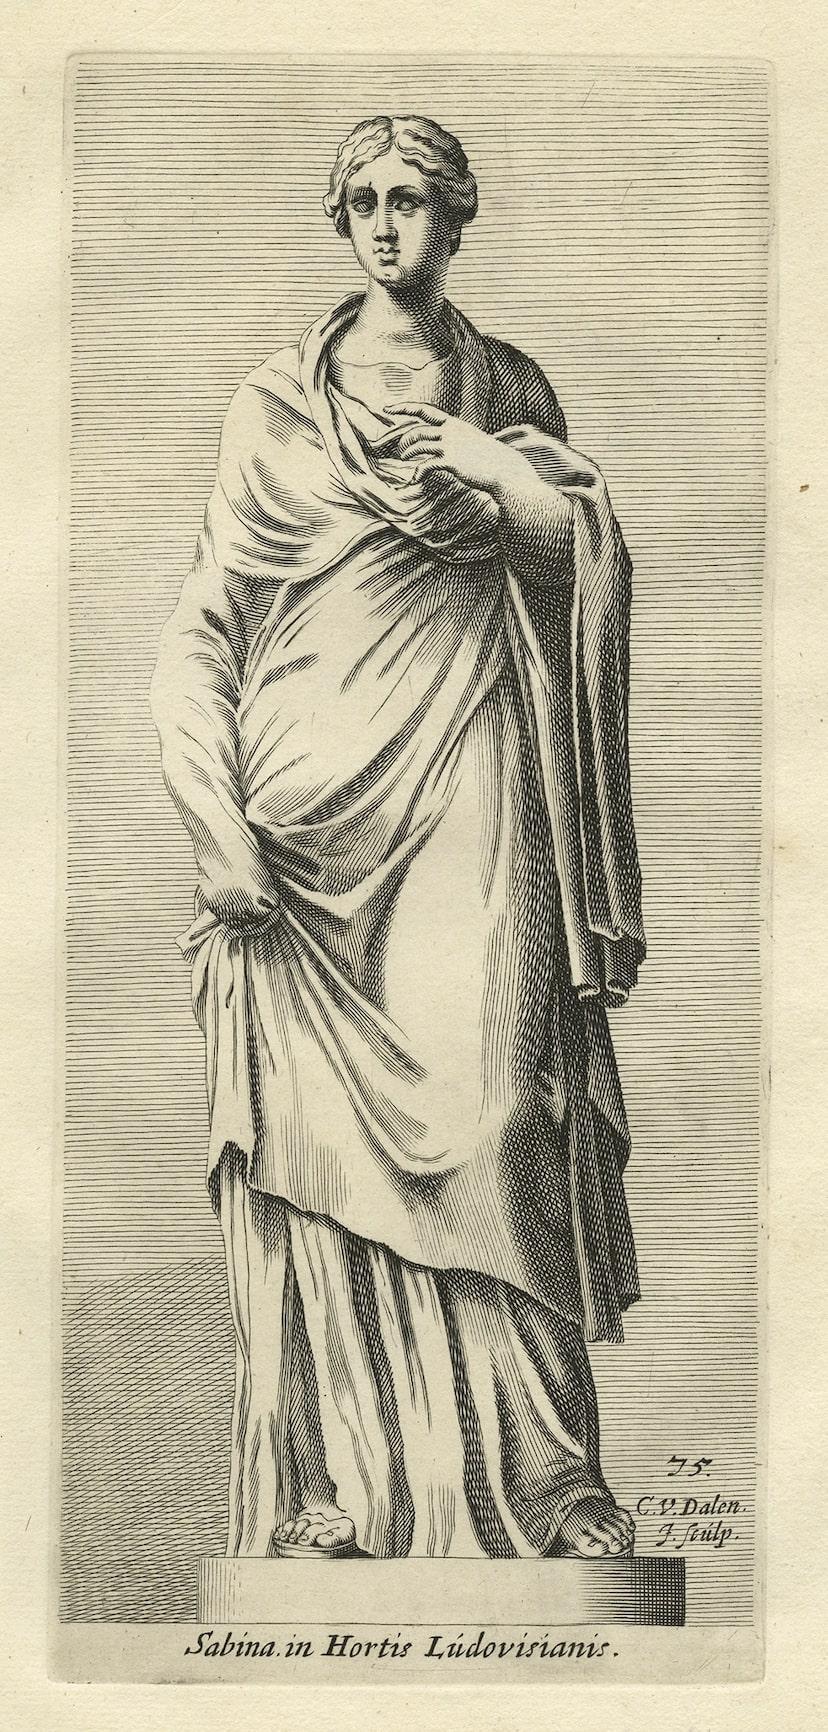 Antique print, titled: 'Sabina in Hortis Ludovisianis.' - Statue of a Sabine woman in Rome. The Sabines were an Italic tribe which lived in the central Apennines of ancient Italy.

From the 1660 Dutch edition of 'Icones et Segmenta Nobil. Signorum